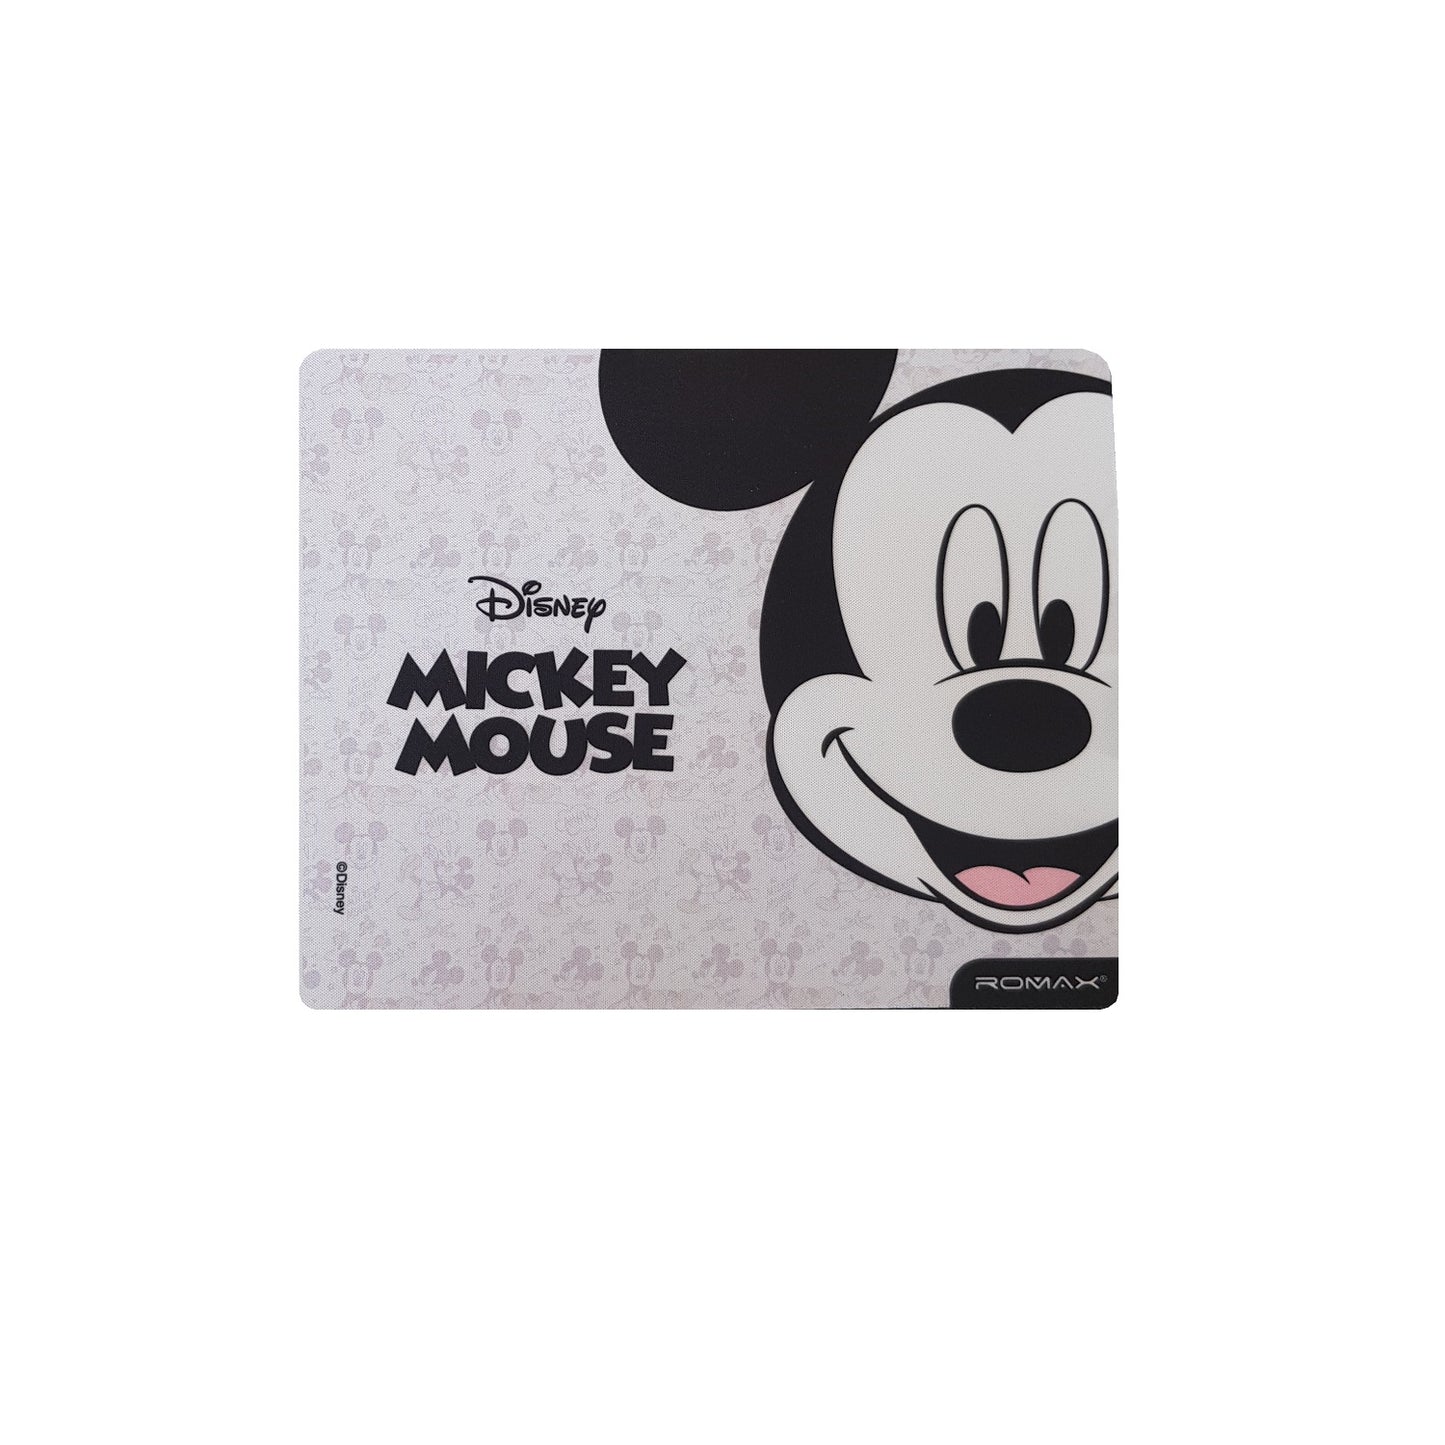 DISNEY MOUSE PAD FACE MICKEY MOUSE - BLANCO